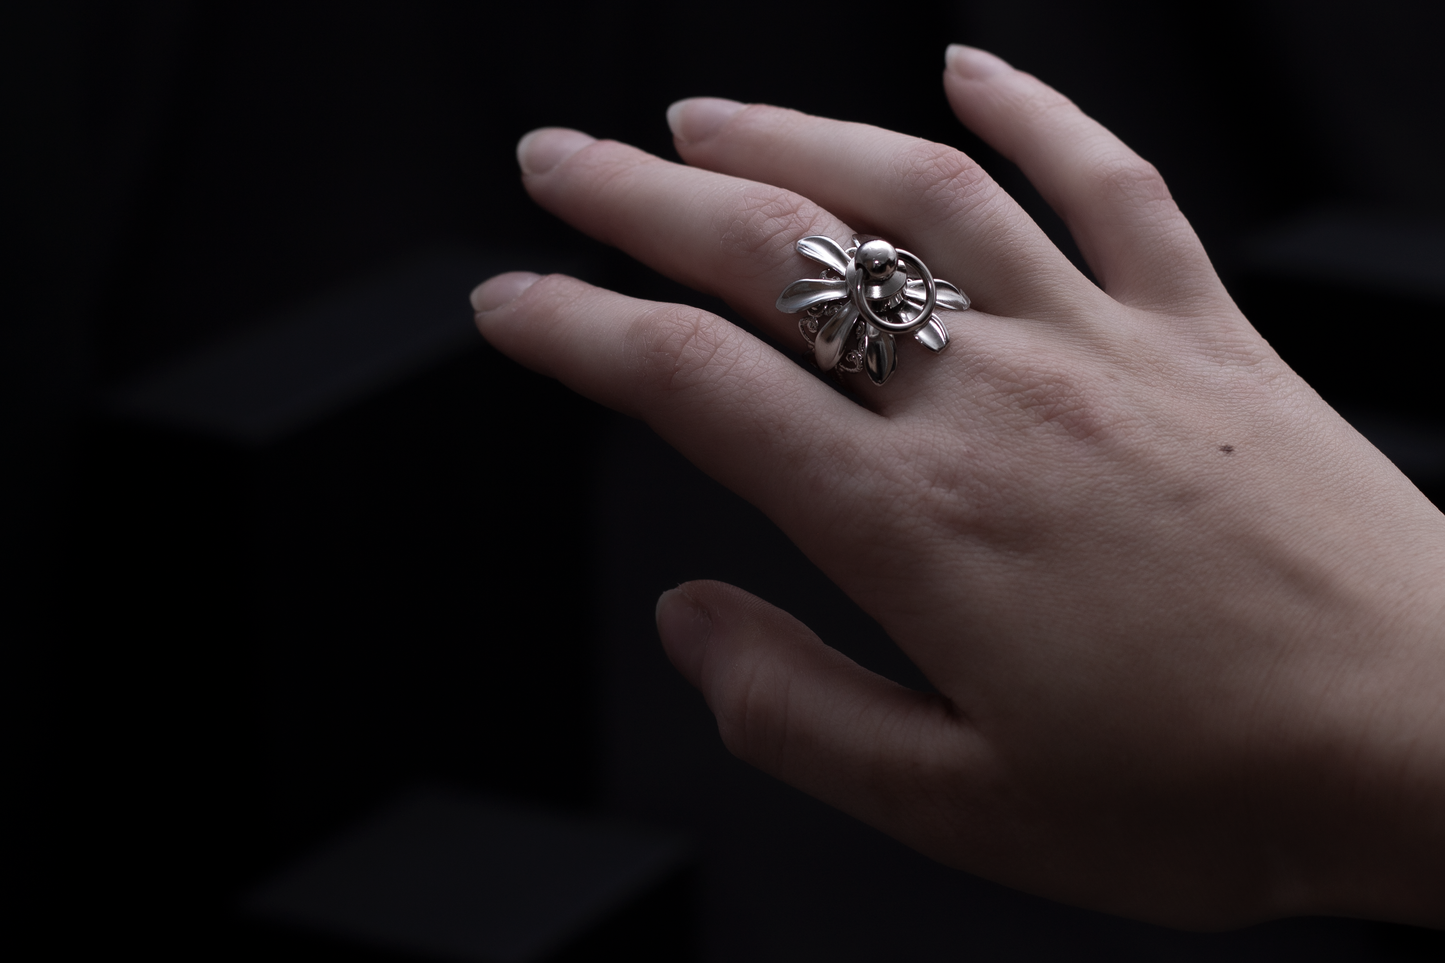 A solitary hand is gracefully adorned with a Myril Jewels ring, capturing the essence of dark-avantgarde elegance. The silver ring, featuring a distinctive floral motif with a gothic twist, sits prominently against the contrasting dark backdrop, designed for those with a passion for gothic and alternative styles. This piece is a testament to Myril Jewels' commitment to crafting unique, handmade jewelry that embodies an avant-garde and sophisticated Italian aesthetic.